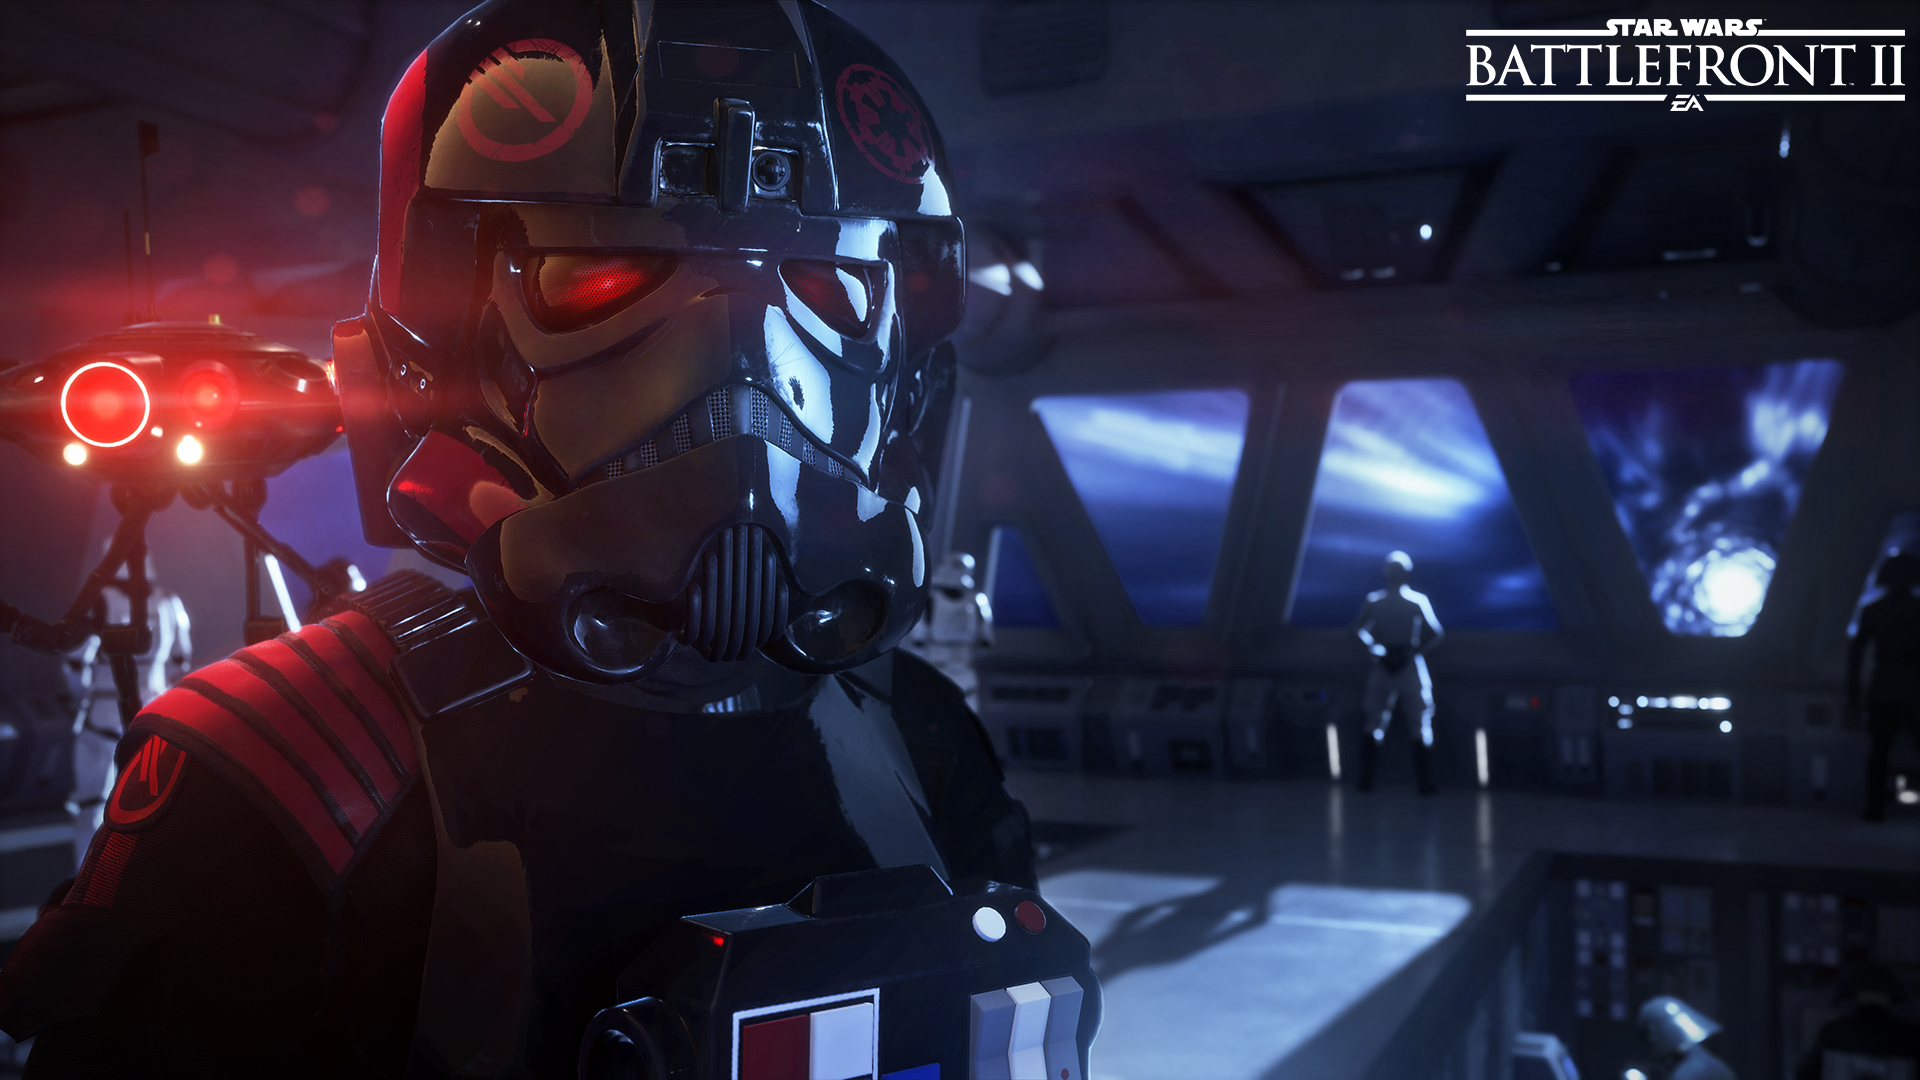 240+ Star Wars Battlefront II (2017) HD Wallpapers and Backgrounds